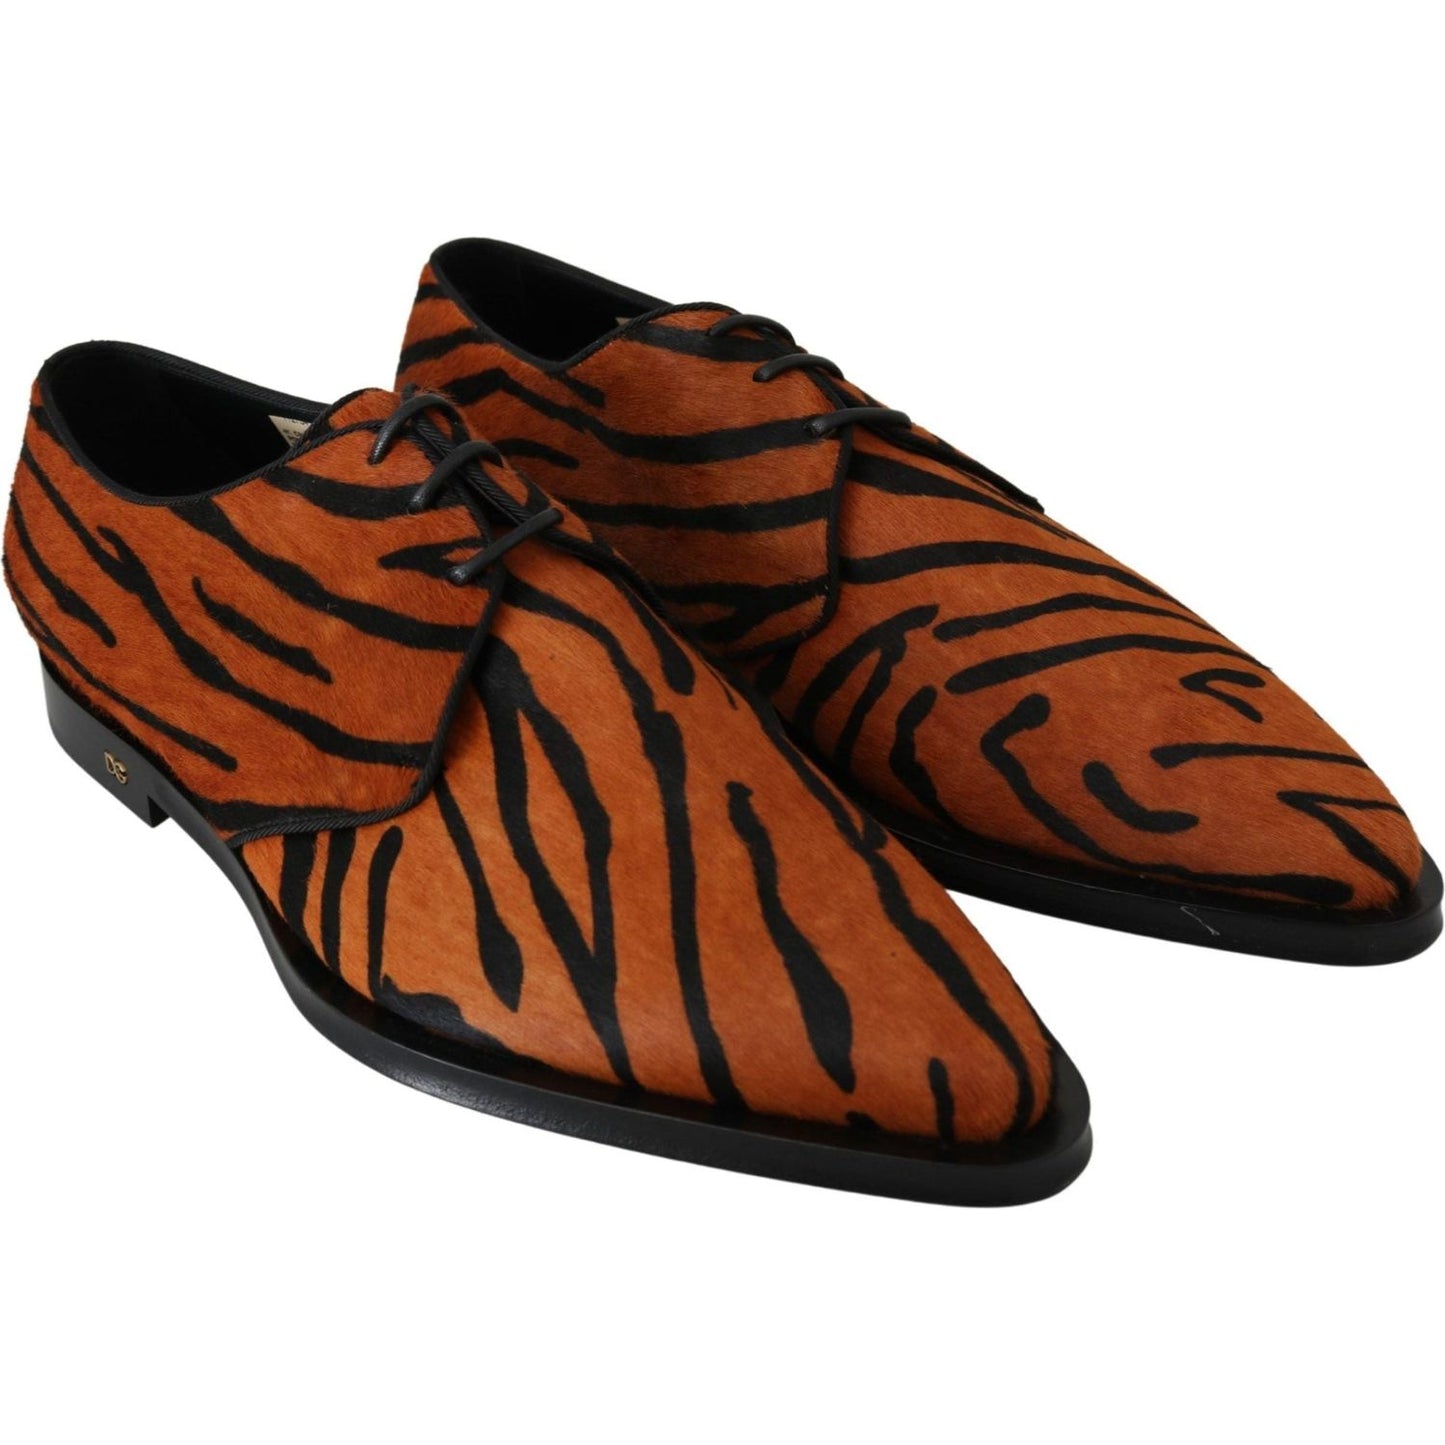 Dolce & Gabbana Tiger Pattern Dress Shoes with Pony Hair orange-pony-hair-formal-dress-broque-shoes-1 IMG_1614-scaled-58db48c5-e90.jpg